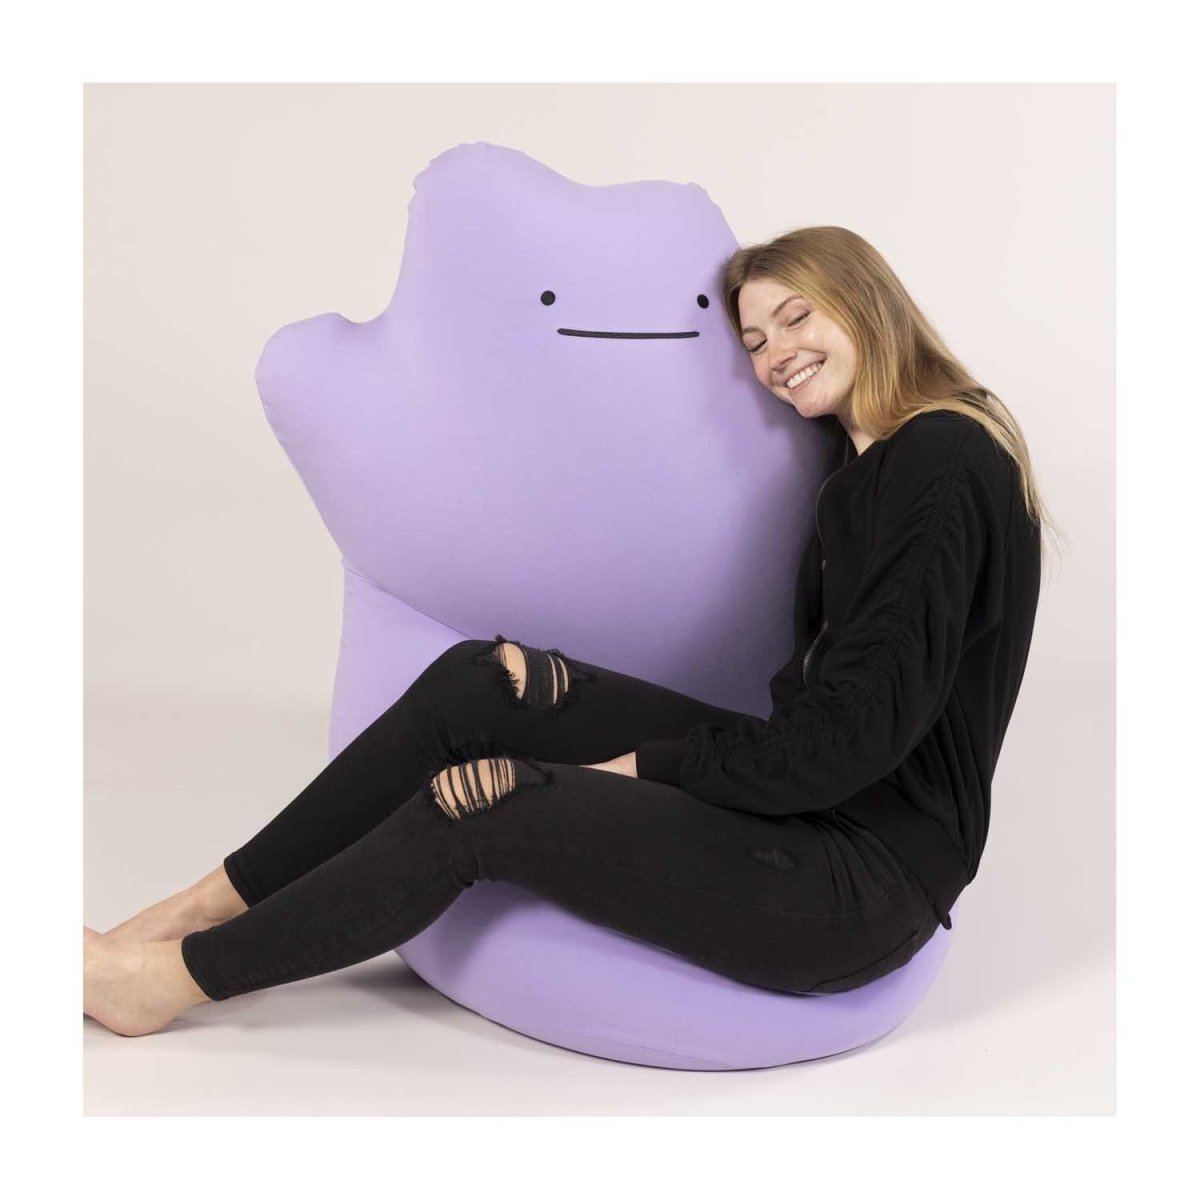 Pokémon Center Drops Snorlax and Ditto Bean Bags